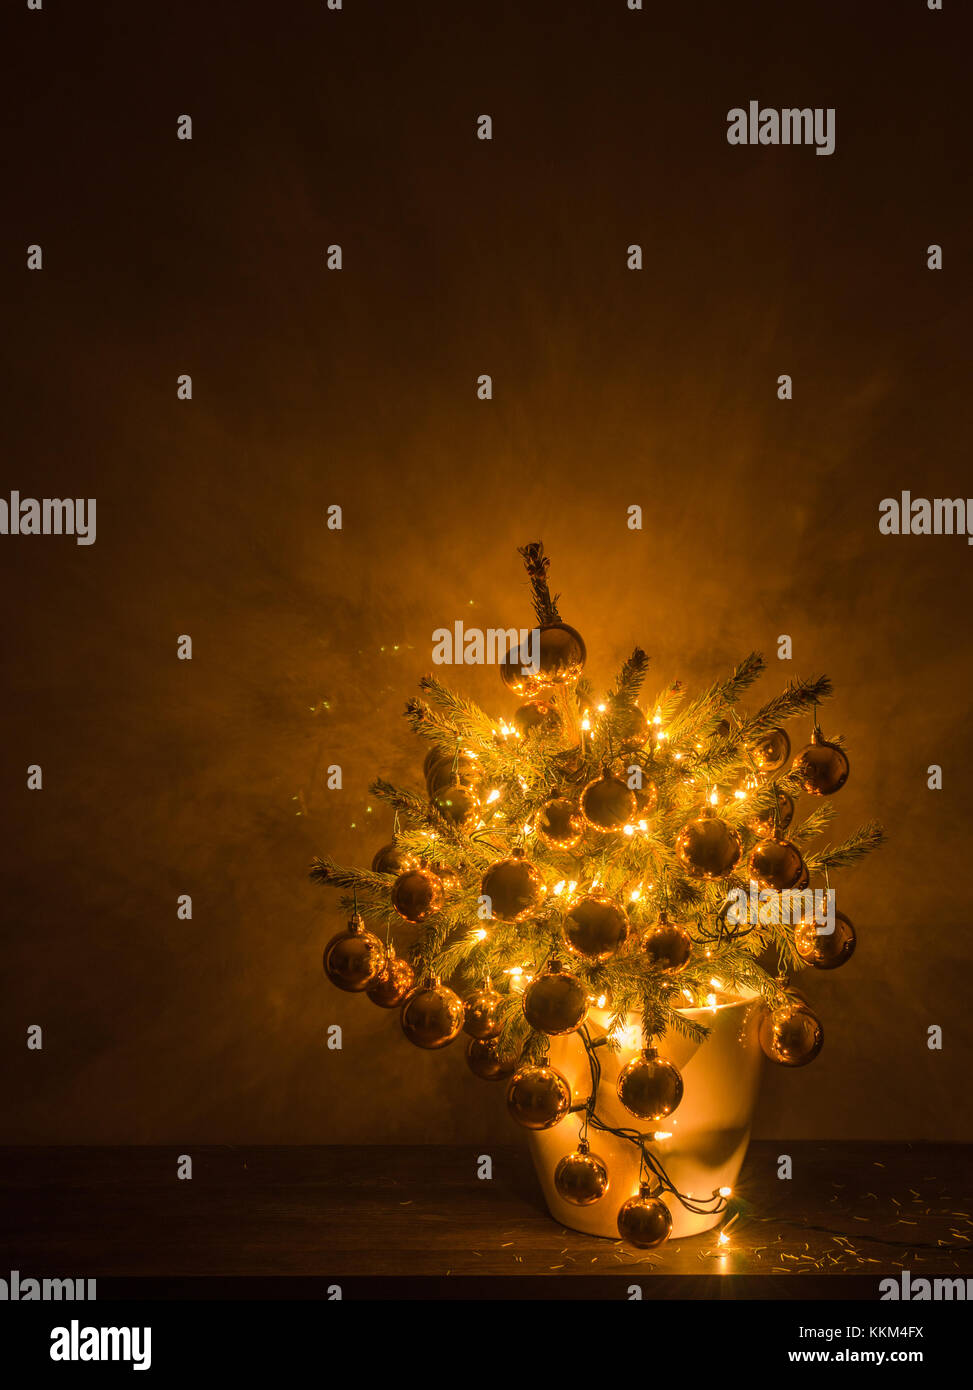 Small Christmas tree with luxury baubles and warm lights, in a white plastic flowerpot, with the dark background. Stock Photo